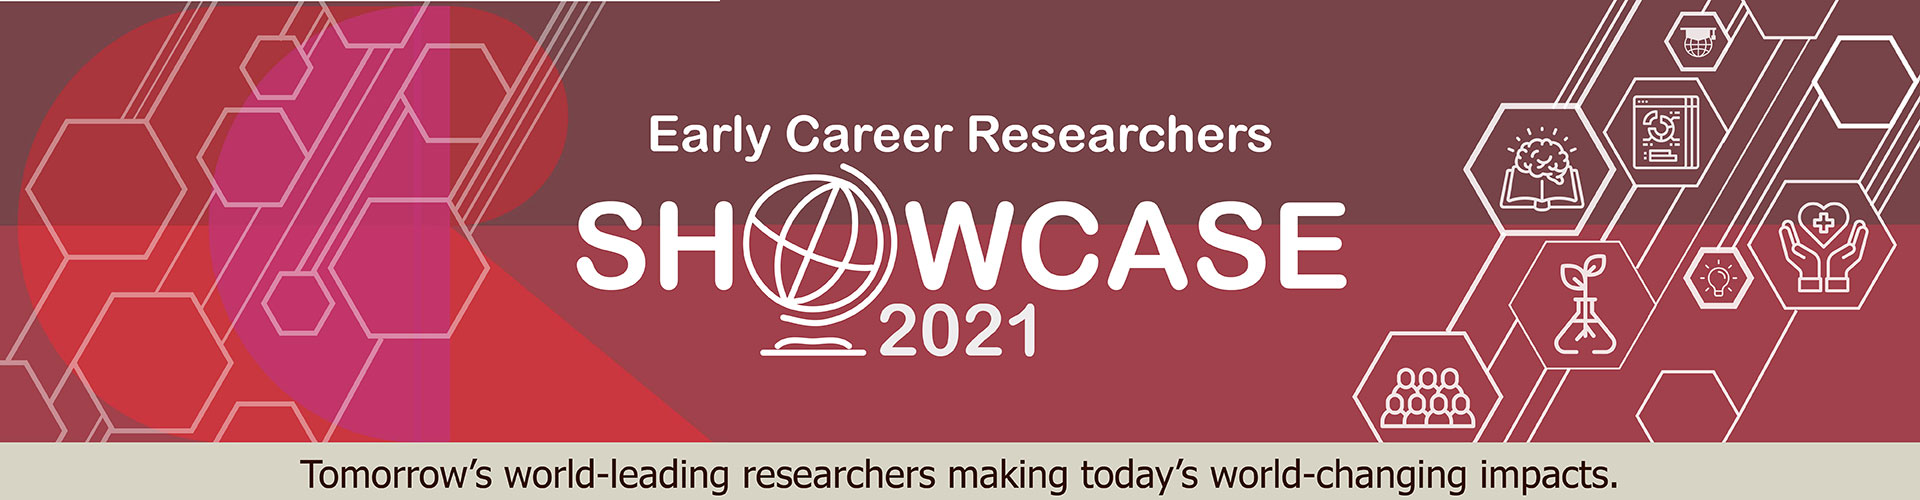 Red and white Early Career Researcher Showcase banner